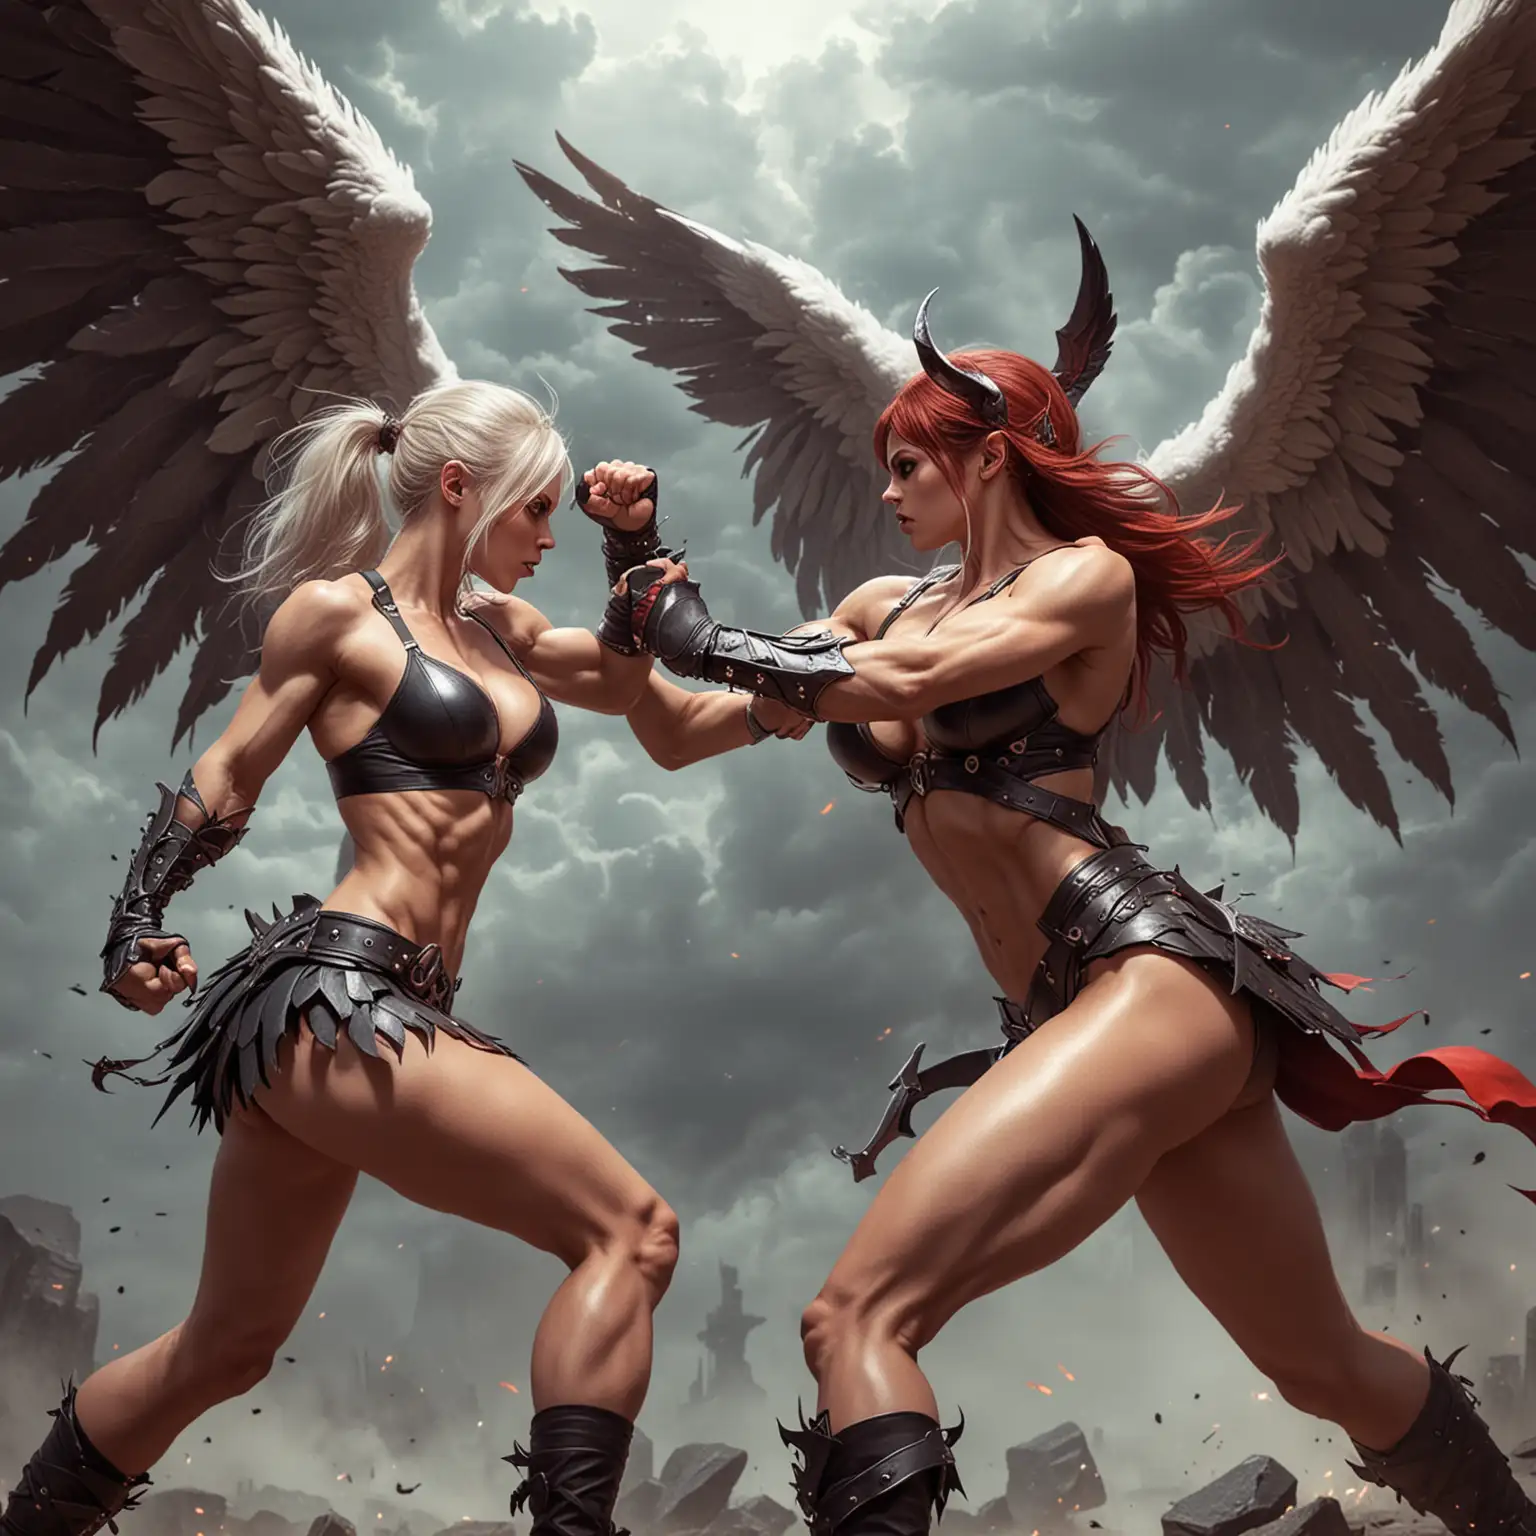 Muscular demon girl fighting with a muscular Angel girl